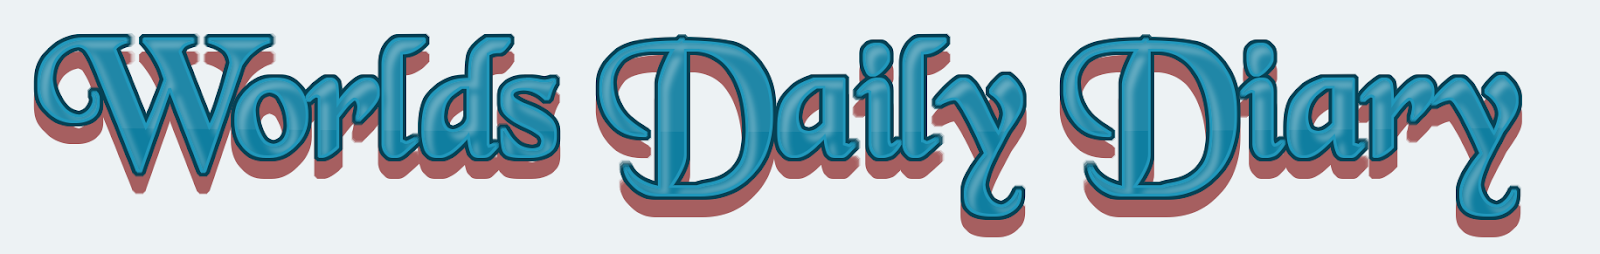 Worlds Daily Diary